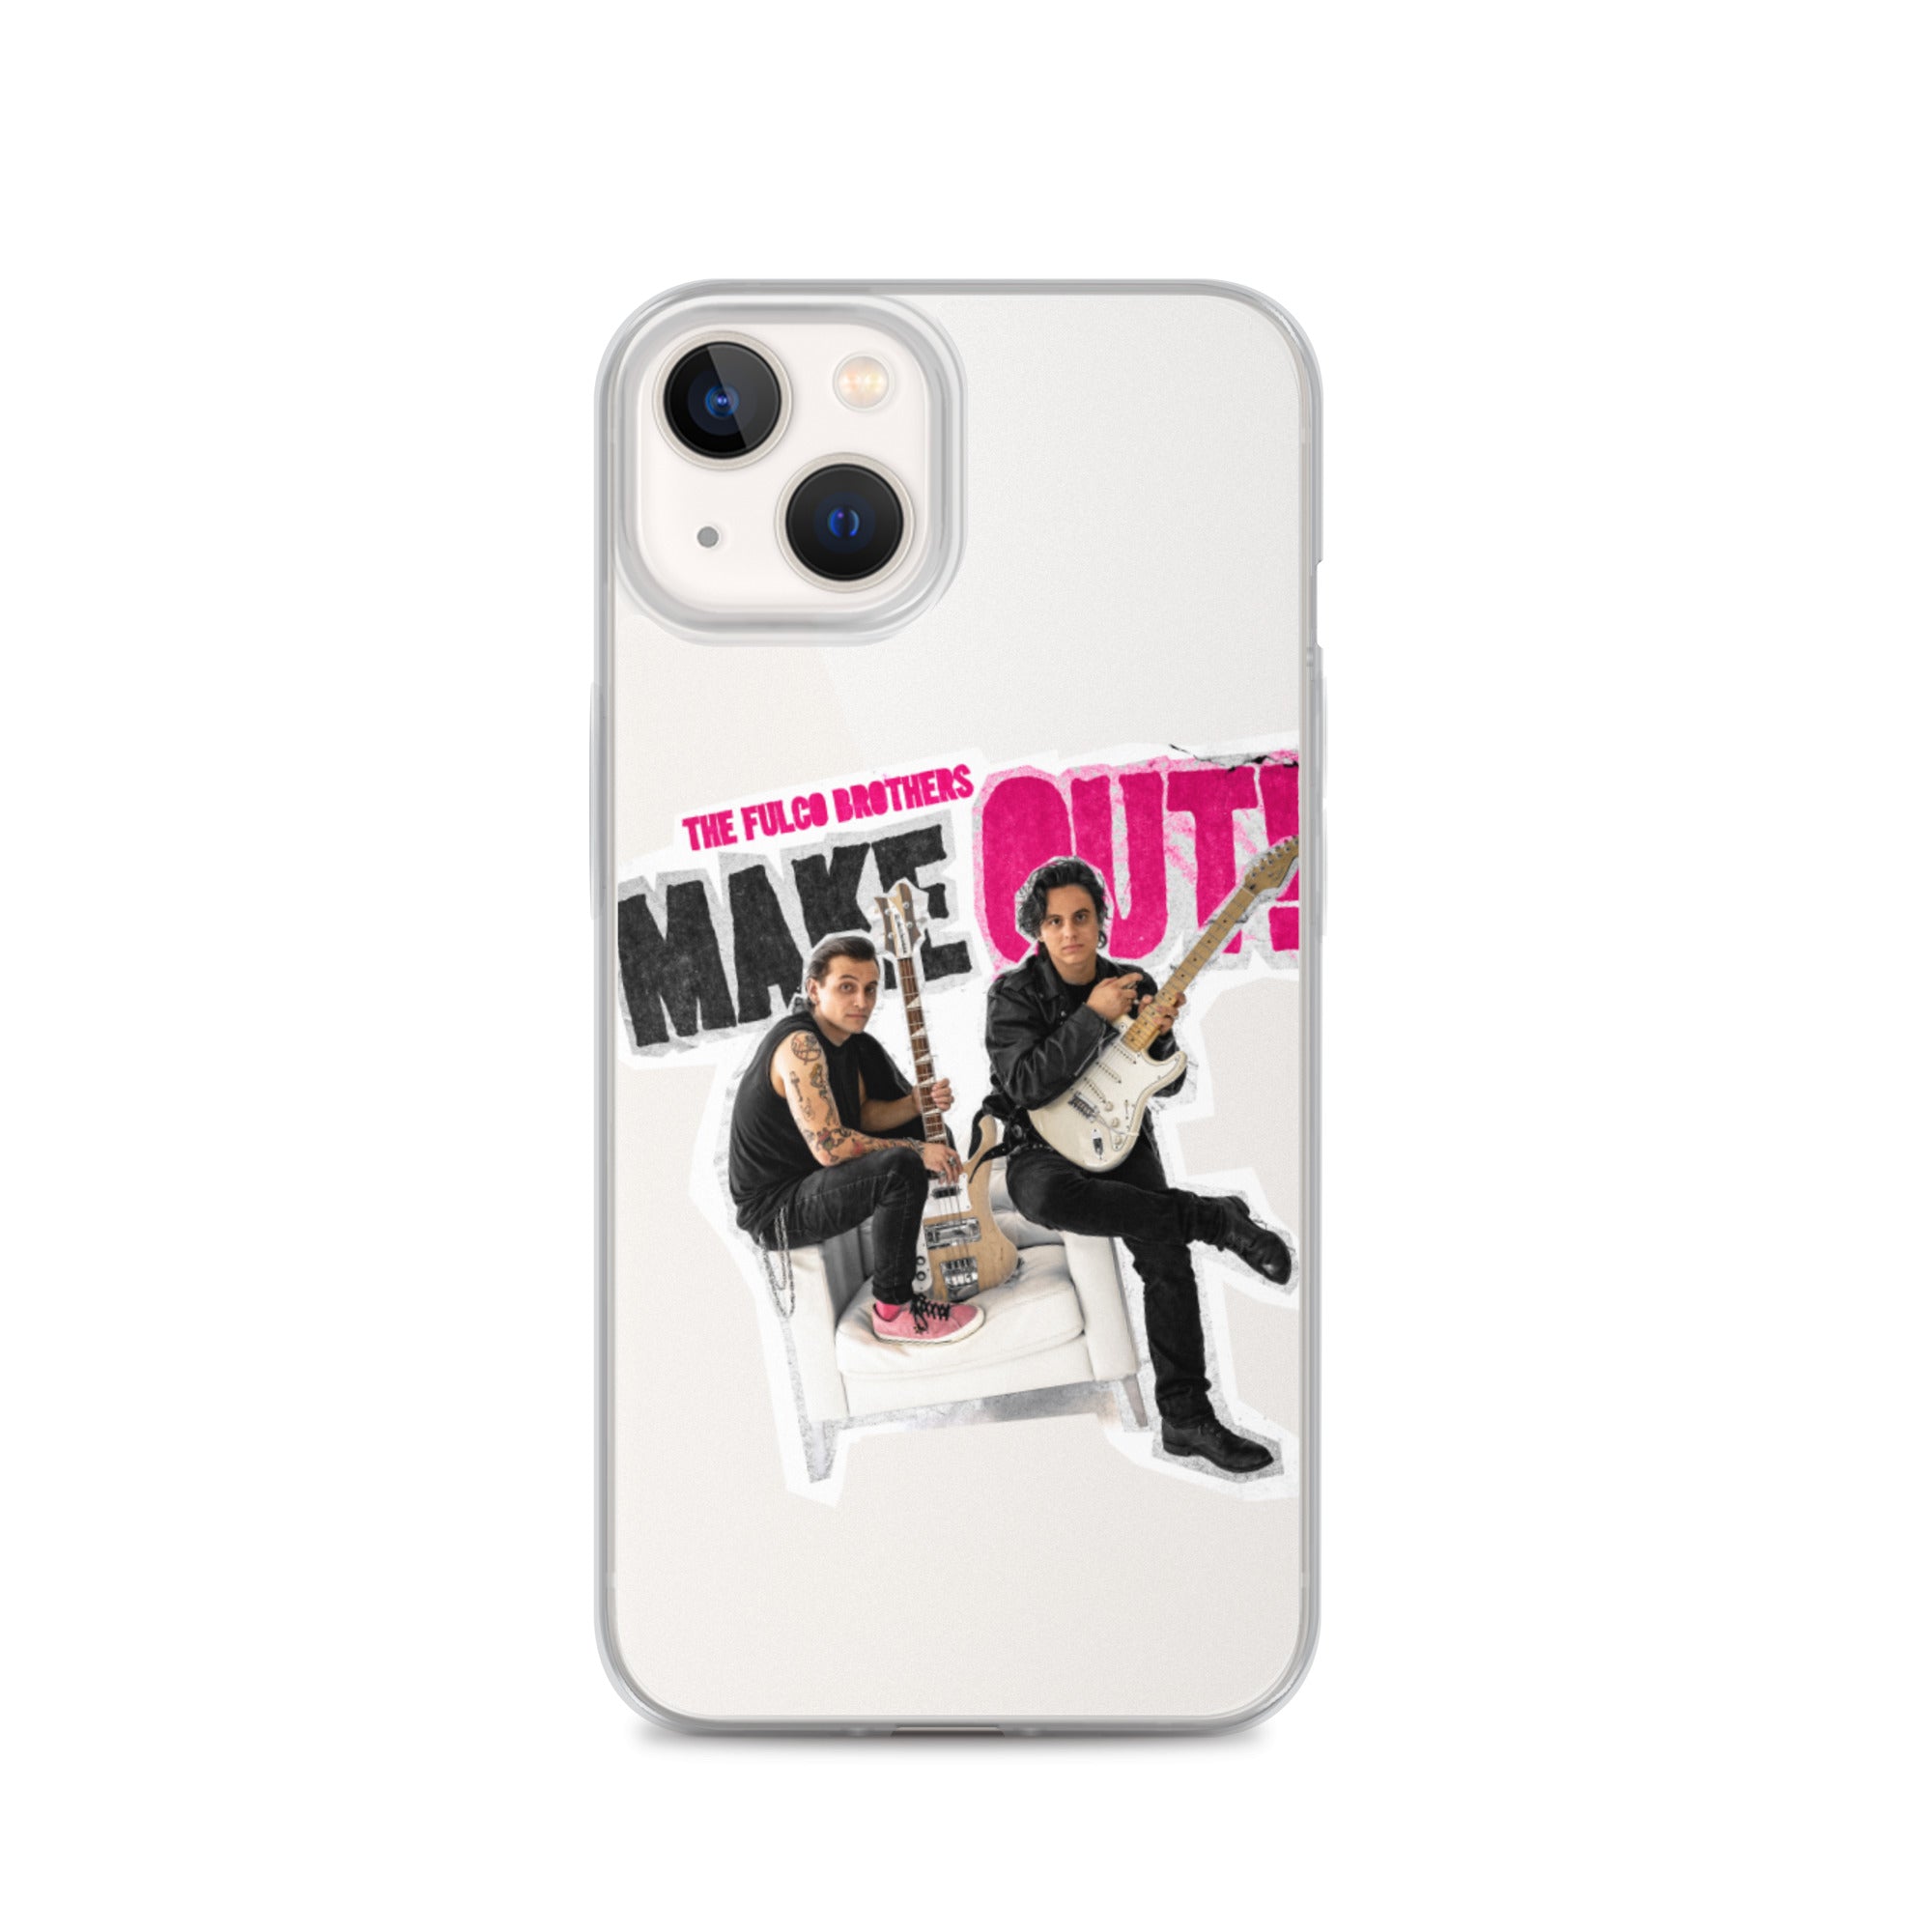 The Fulco Brothers - iPhone Case